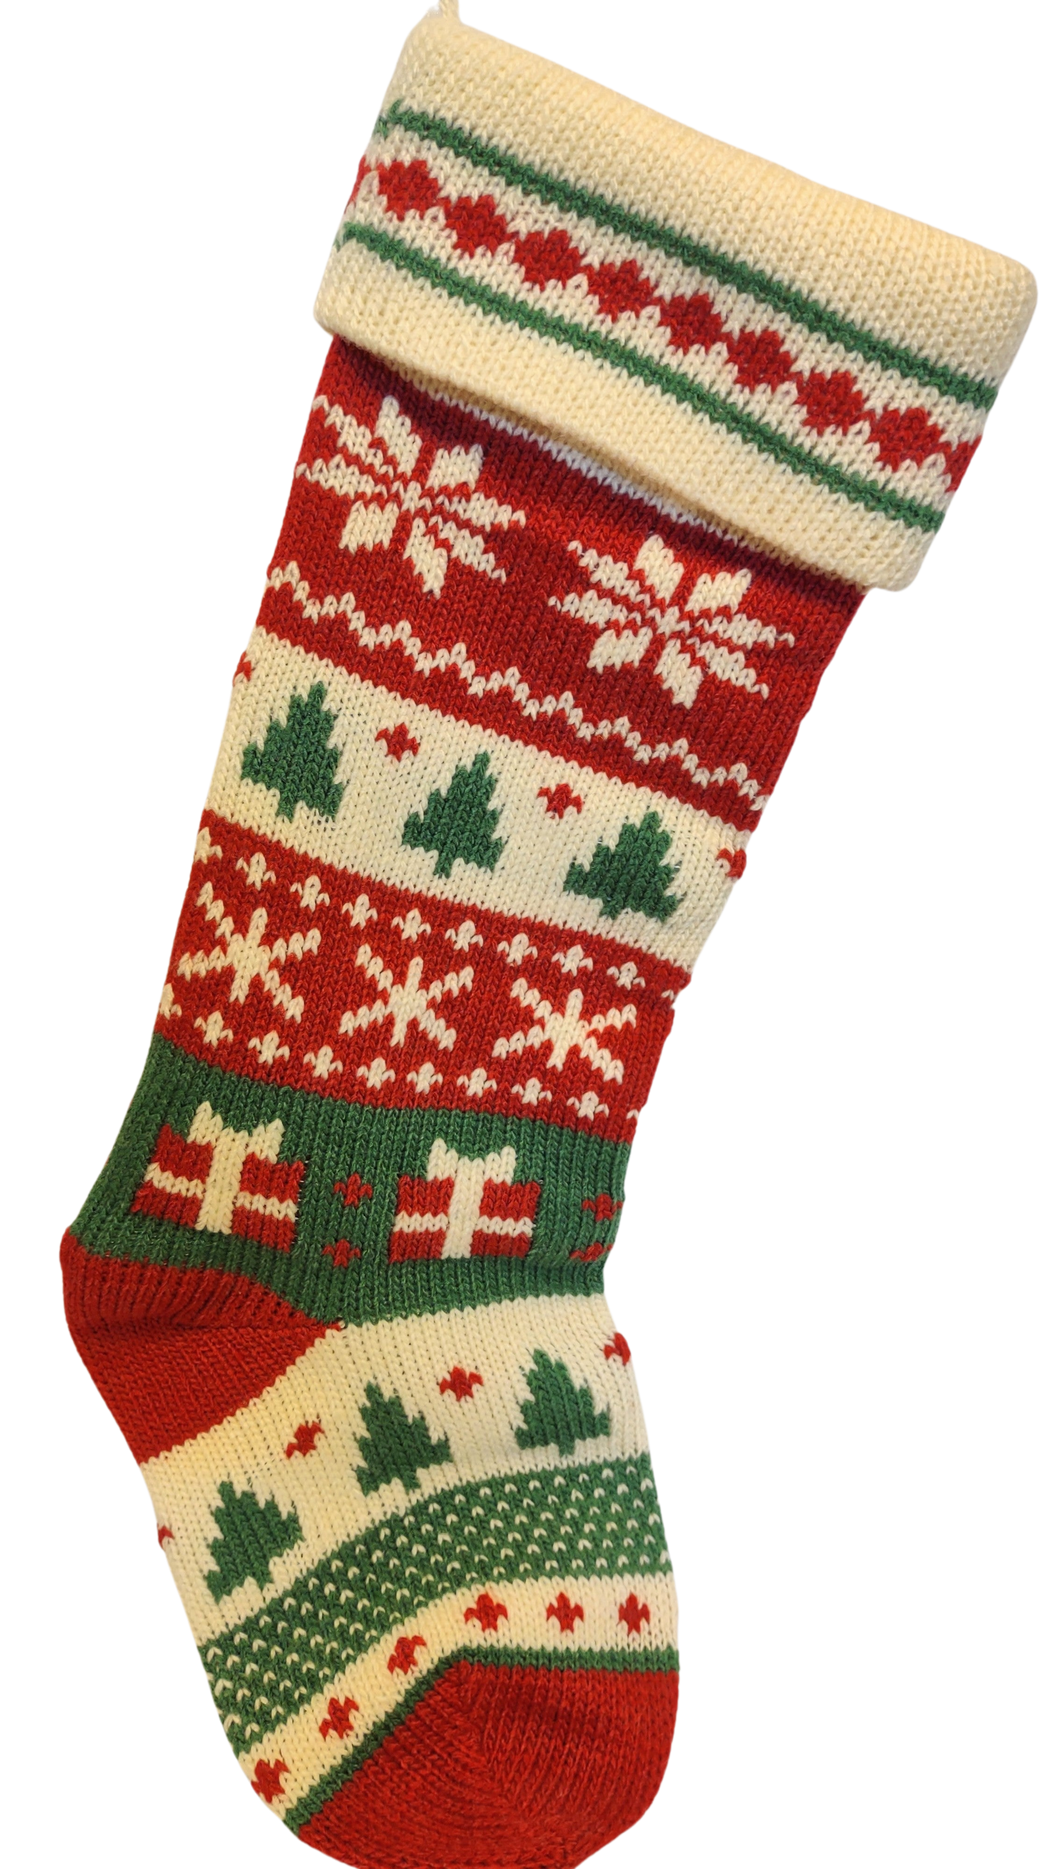 Red/Green/White Heavy Knit Stocking with Snowflakes/Trees/Presents 20